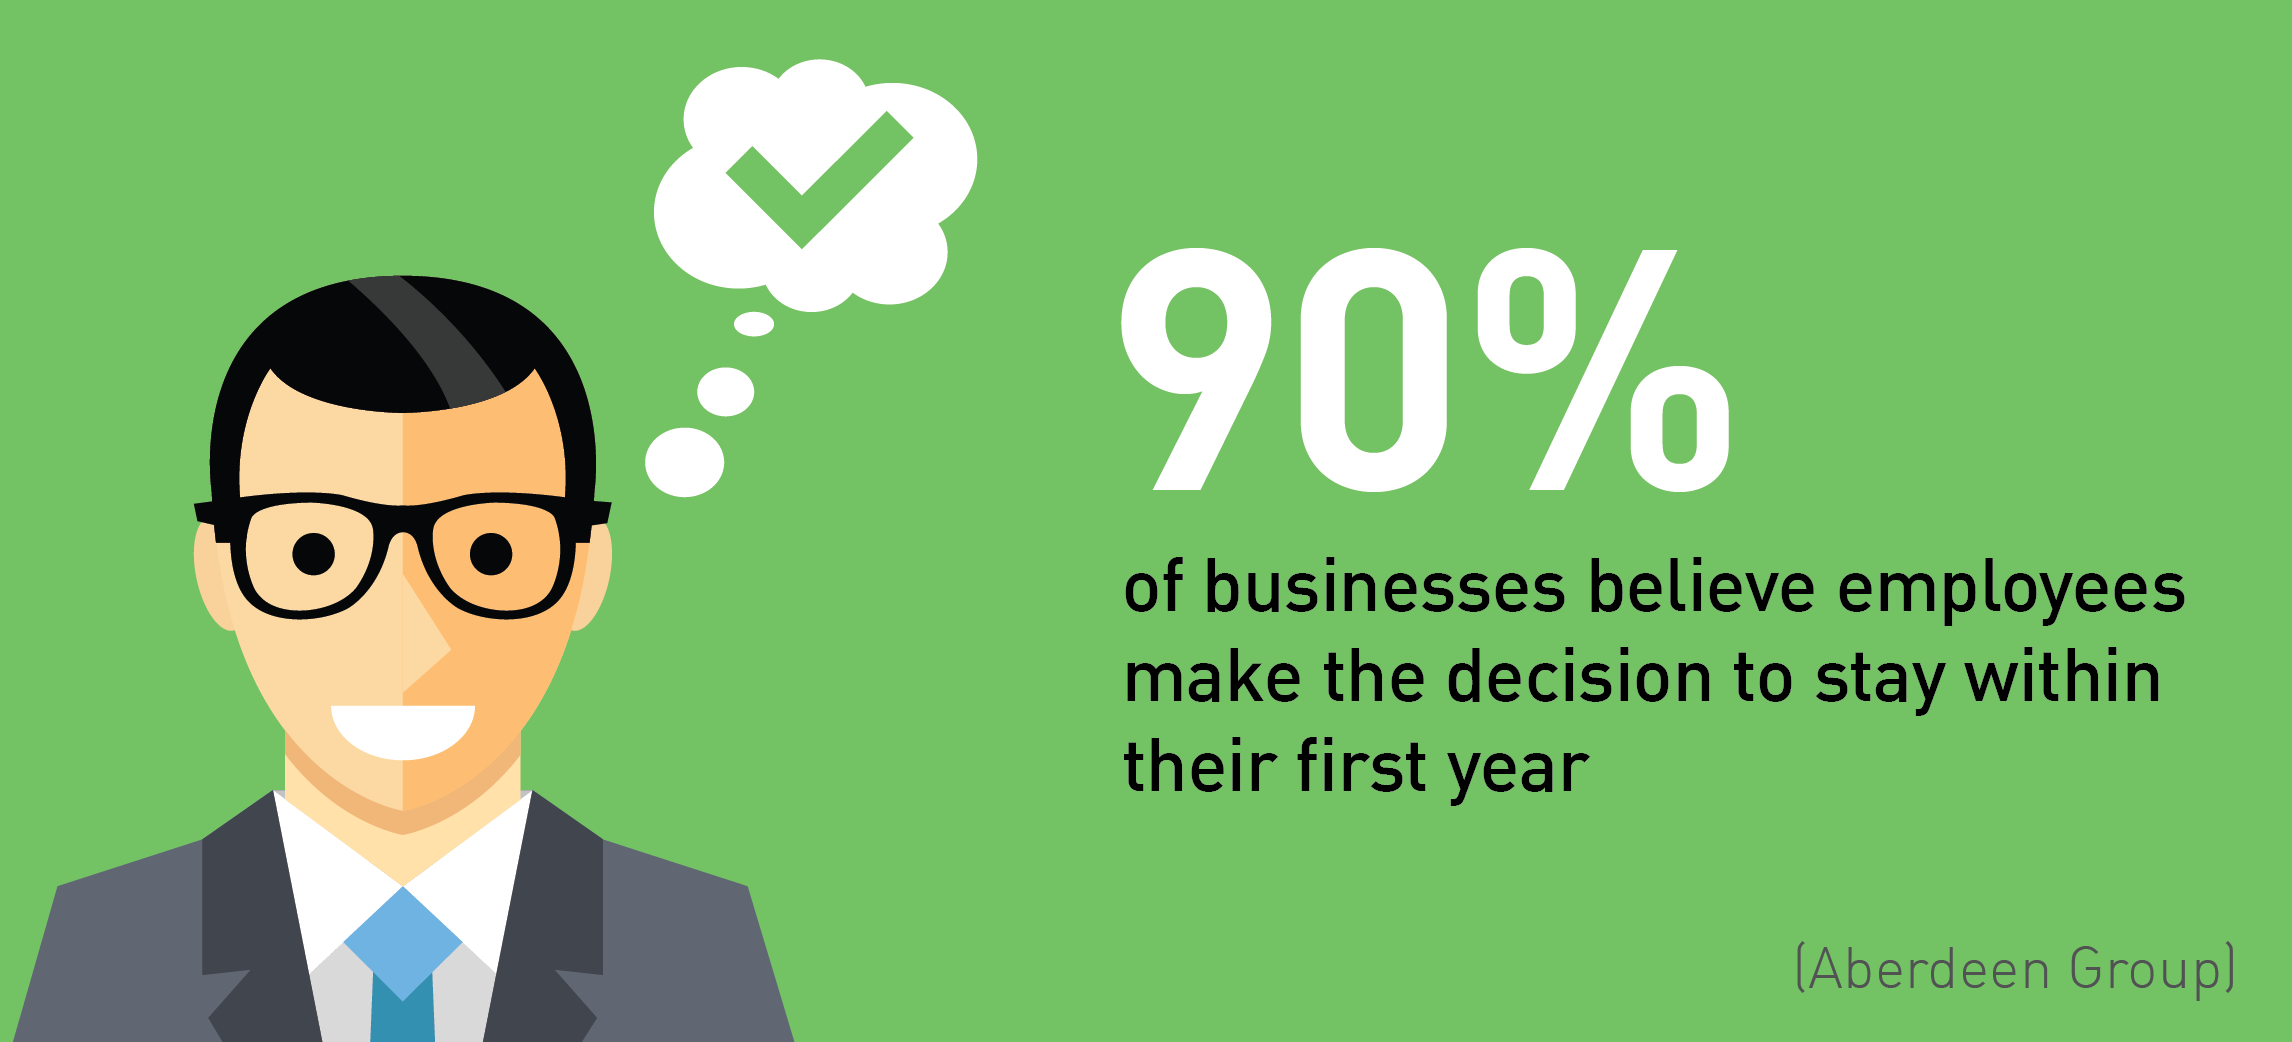 90% of business leaders believe employees decide to stay long-term within the first year